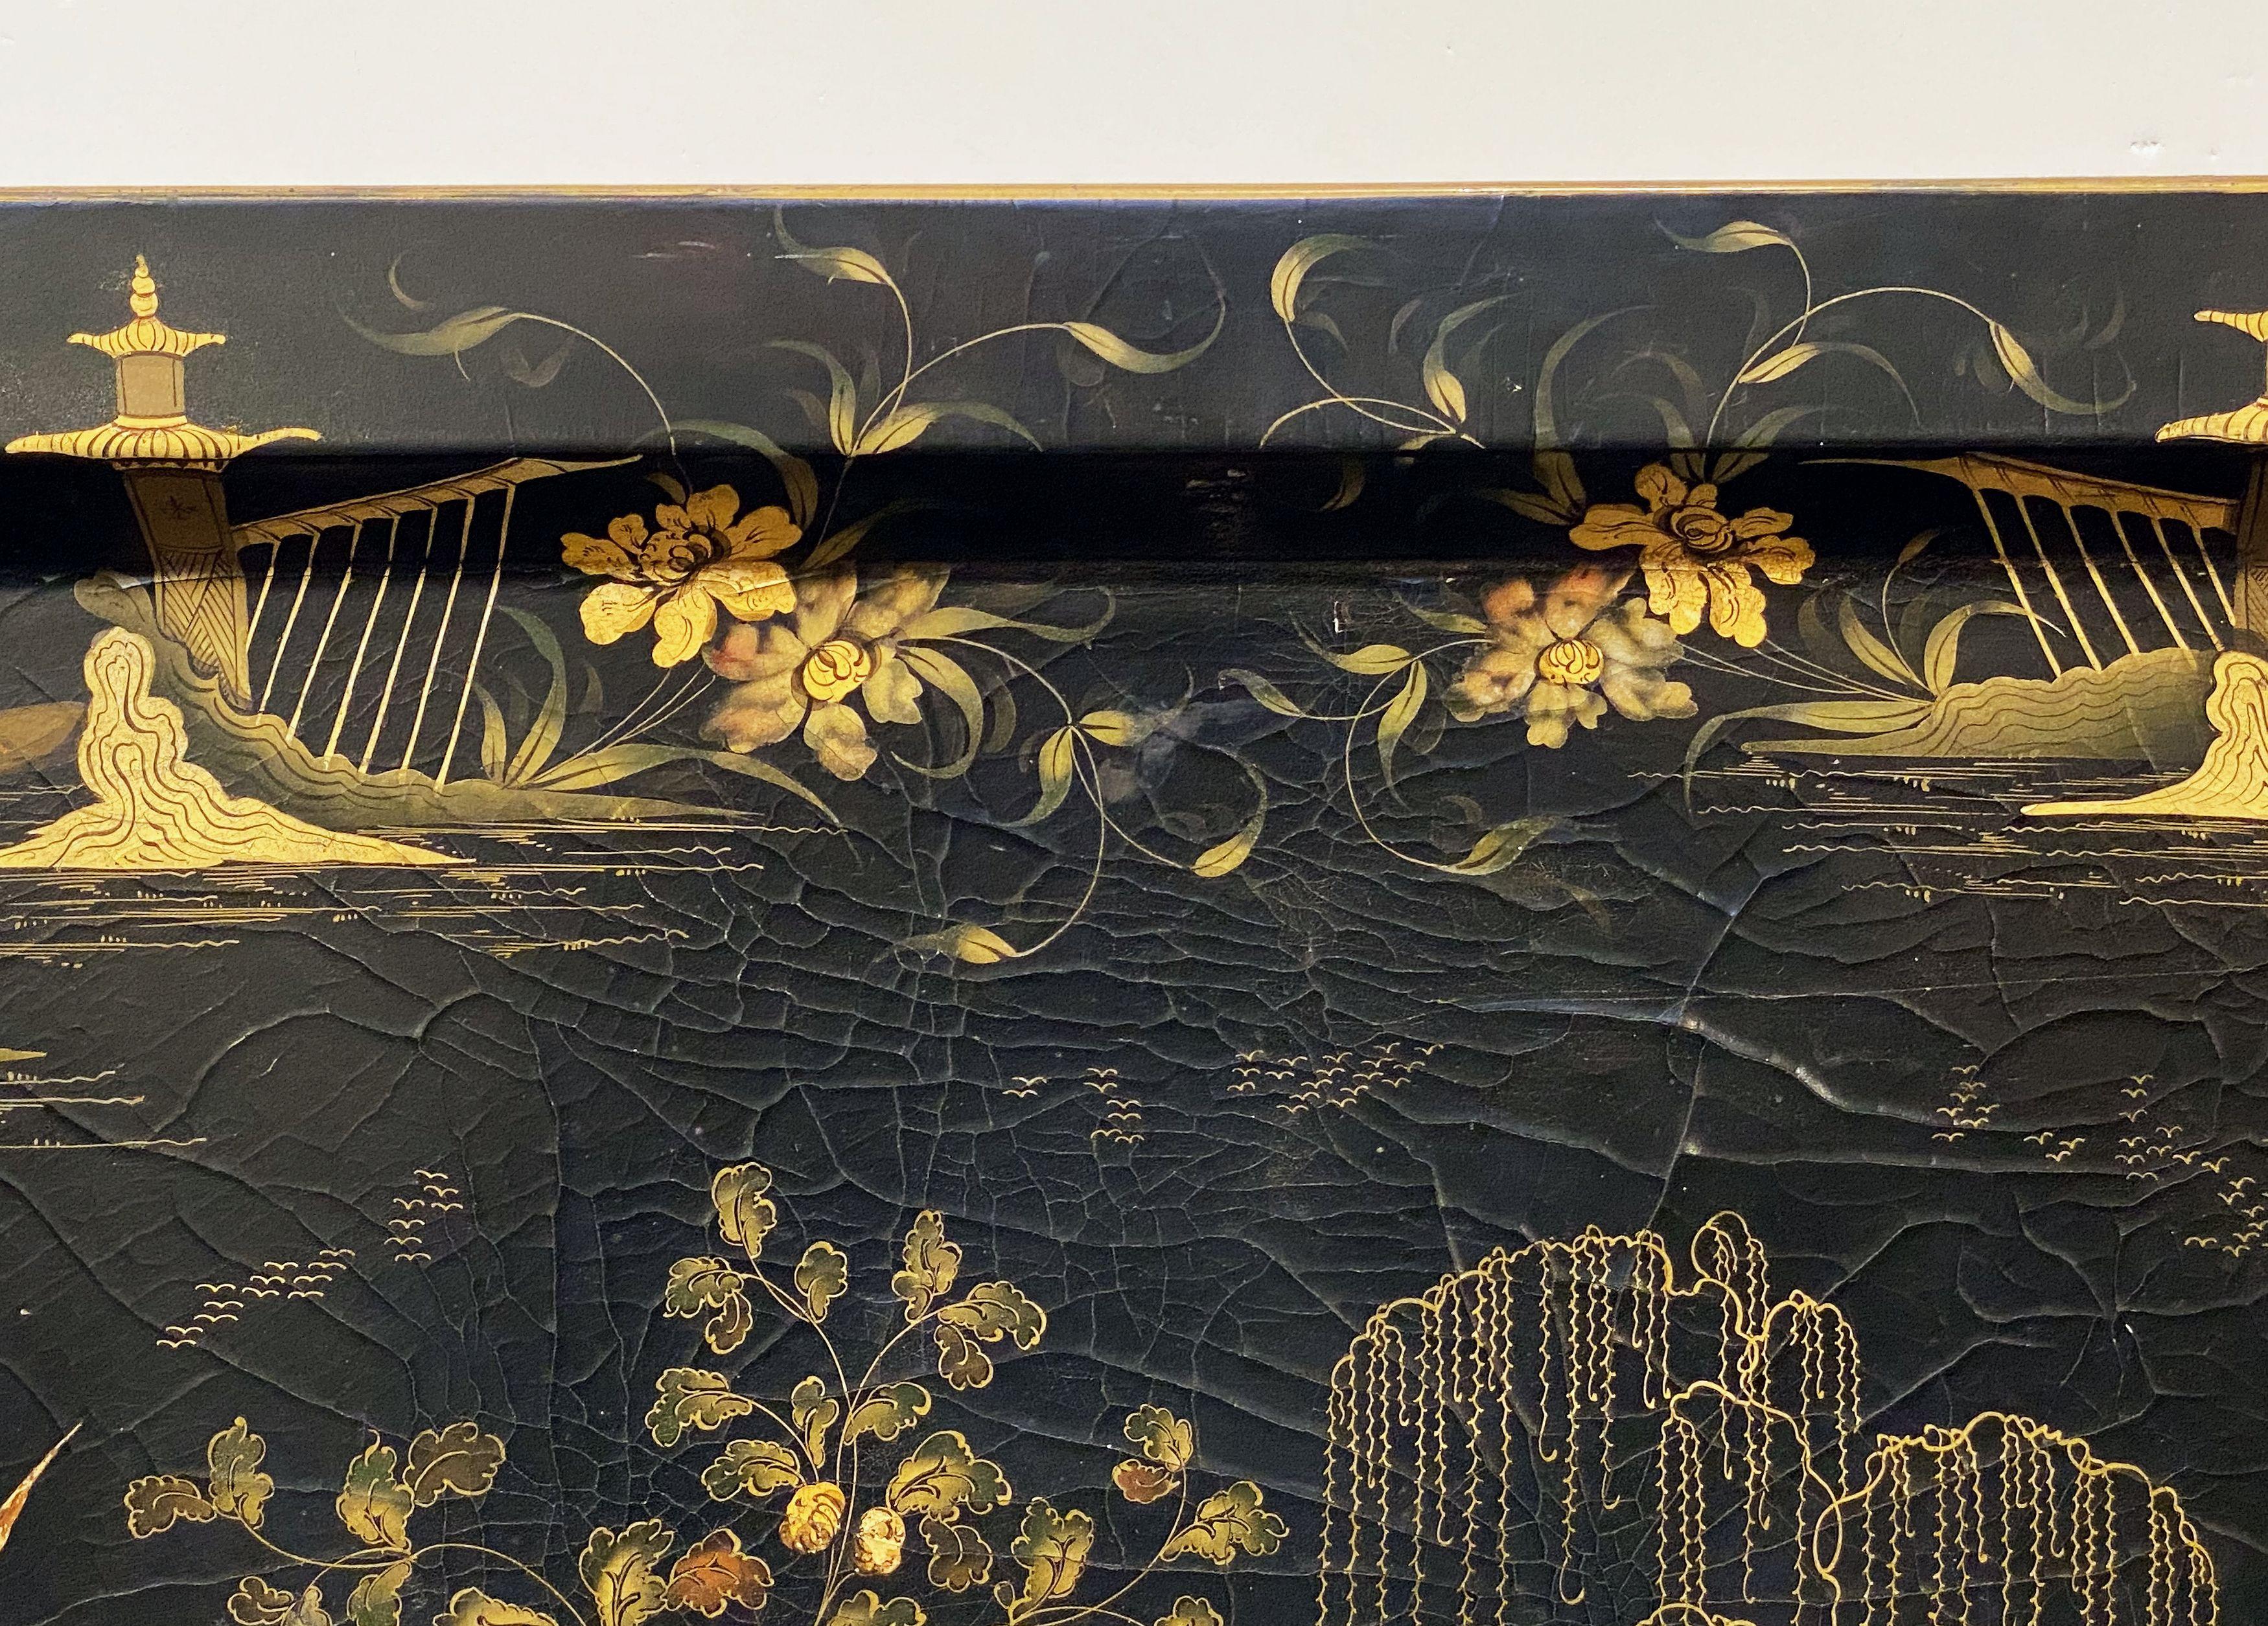 A fine large English lacquered papier-mâché tray from the Aesthetic Movement period, featuring a decorative chinoserie painting of stylized Asian figures, pagodas, and a garden bridge. Measures: (H 23 3/4 x W 30 1/4).